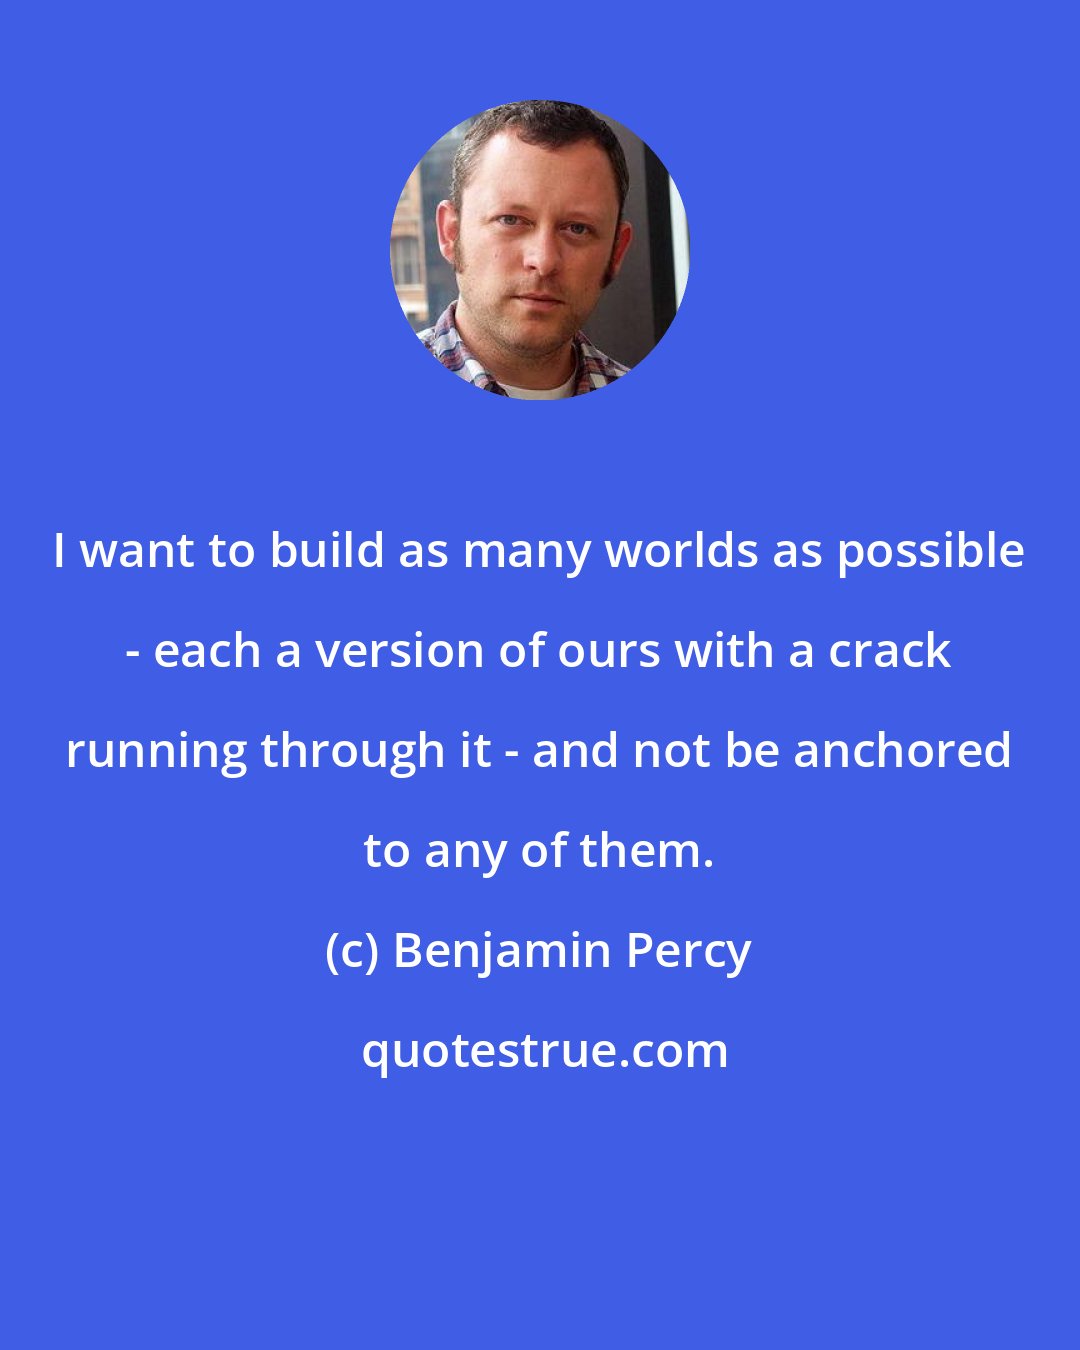 Benjamin Percy: I want to build as many worlds as possible - each a version of ours with a crack running through it - and not be anchored to any of them.